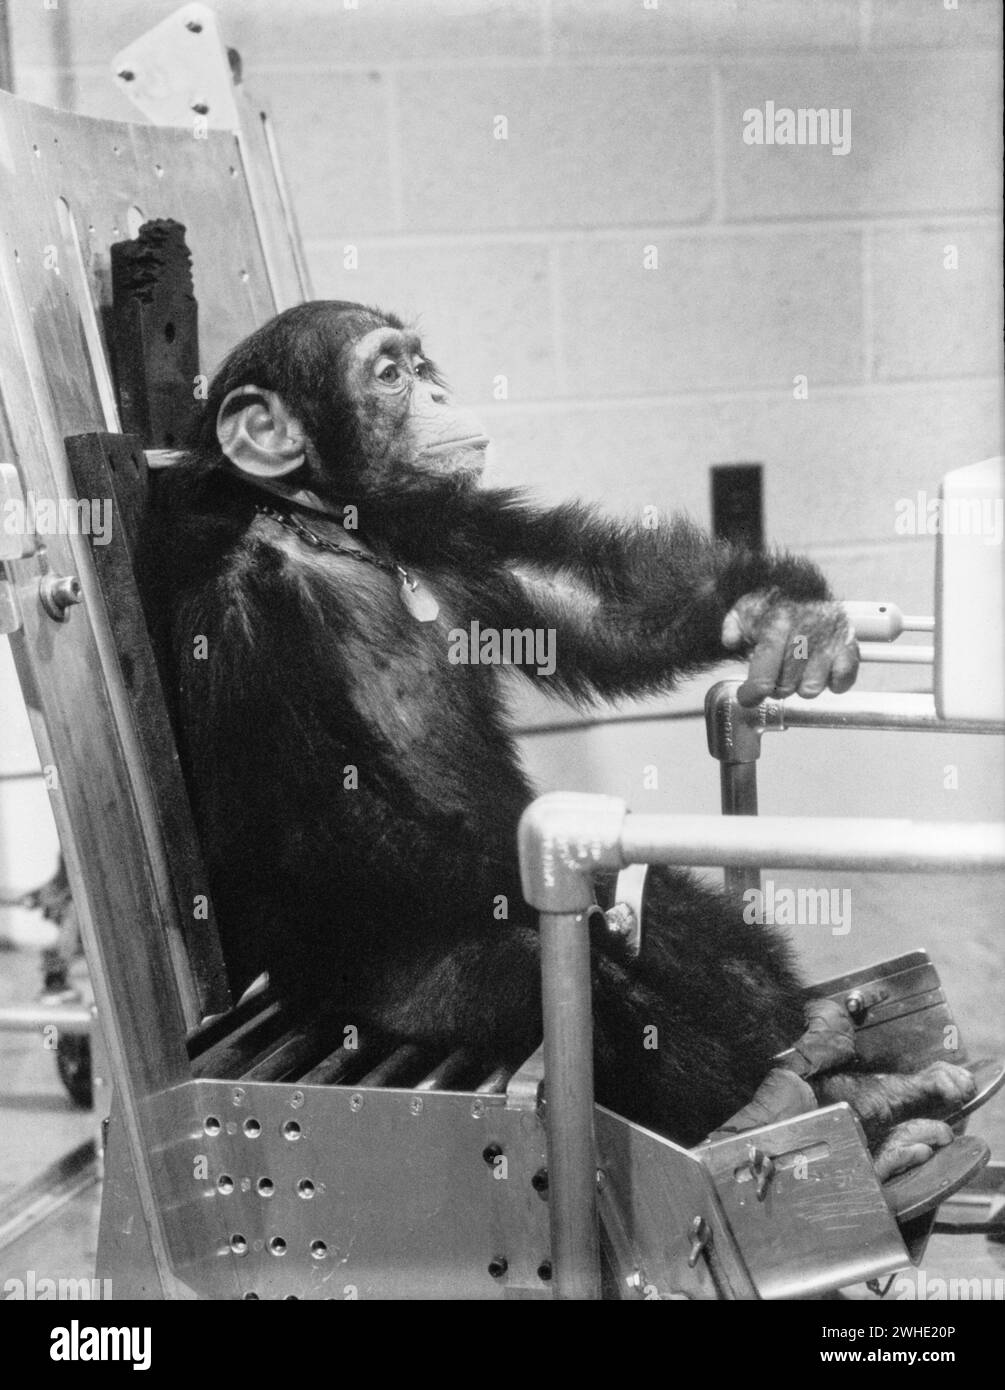 (31 Jan. 1961) --- Chimpanzee 'Ham' during preflight activity with one of his handlers prior to the Mercury-Redstone 2 (MR-2) test flight from the American space program which was conducted on Jan. 31, 1961. Ham would become the first primate in space. Stock Photo